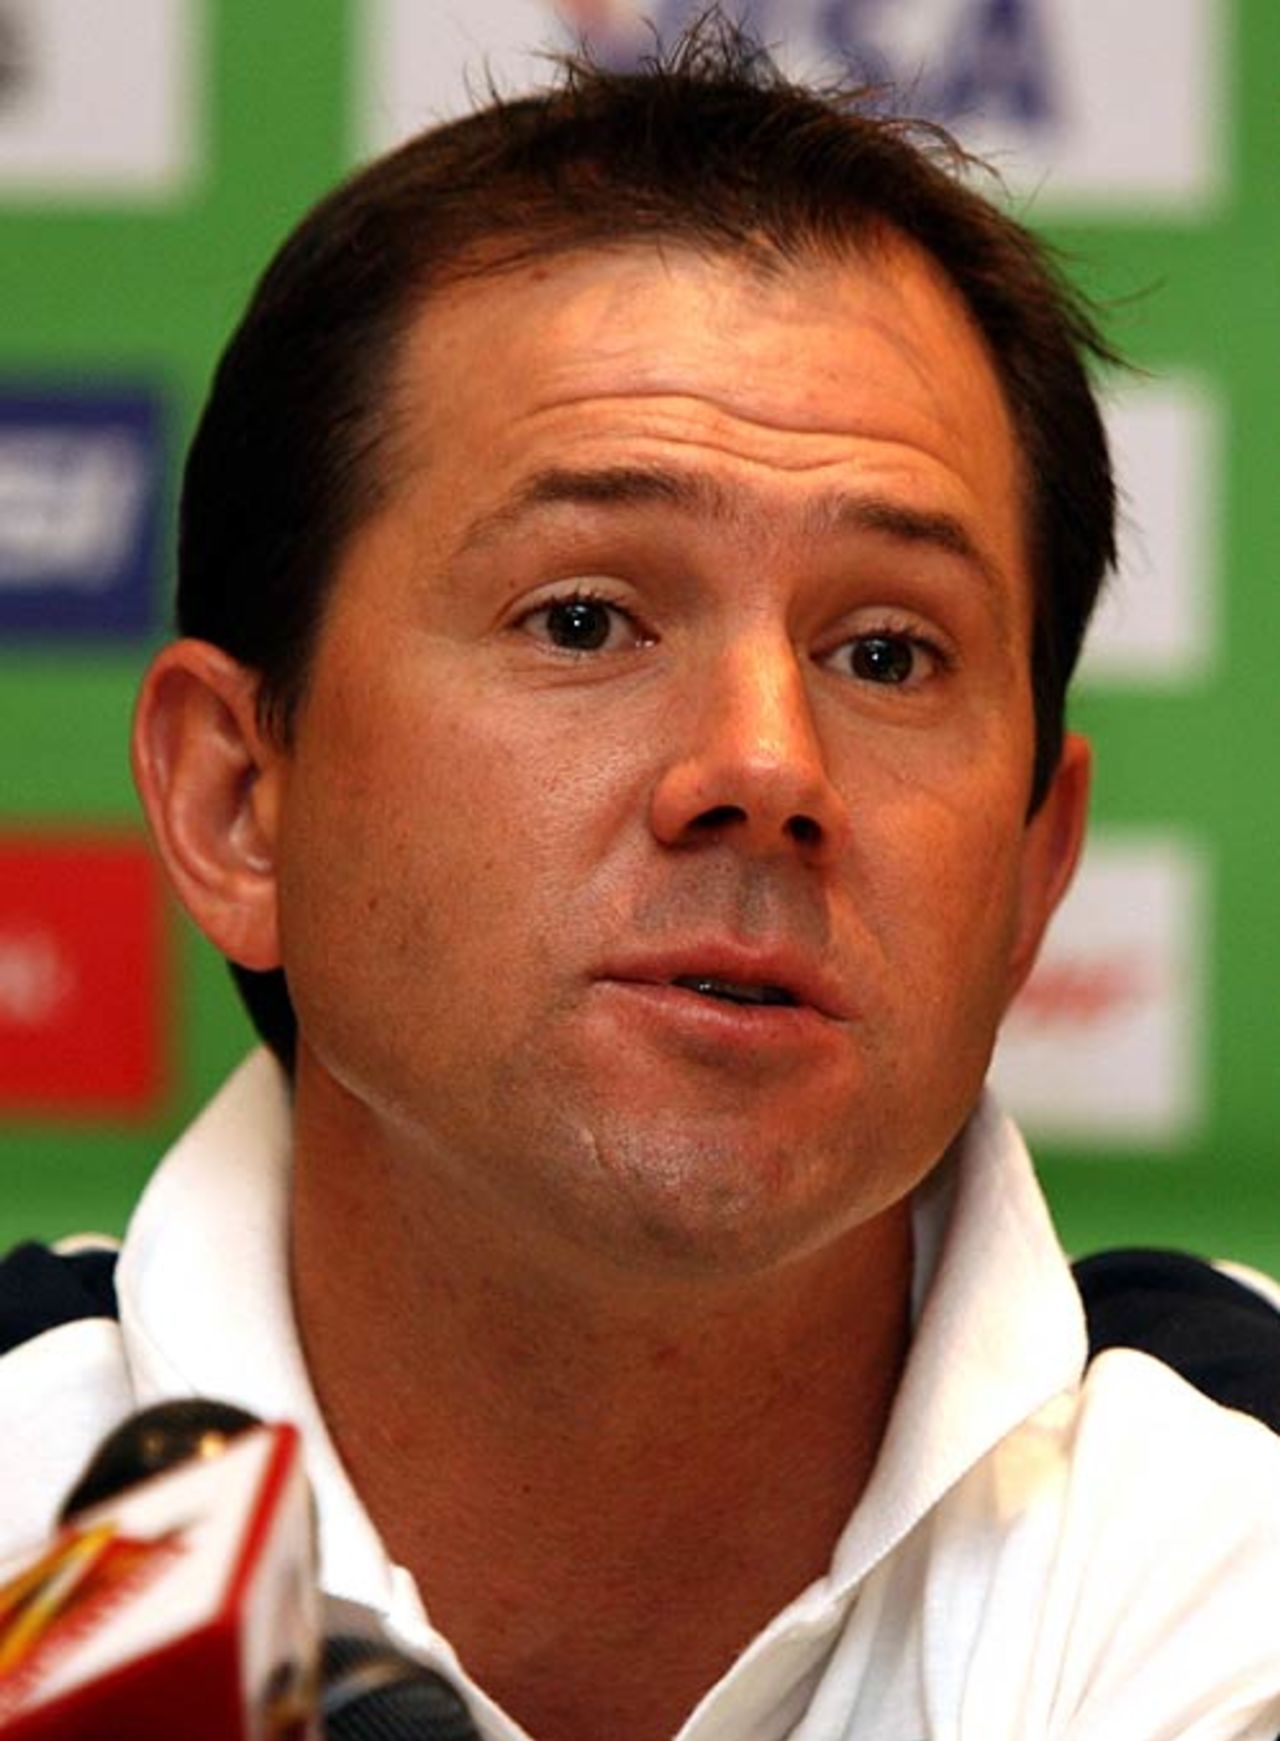 Ricky Ponting speaks to the media ahead of the World Cup opening ceremony, Montego Bay, Jamaica, March 11, 2007